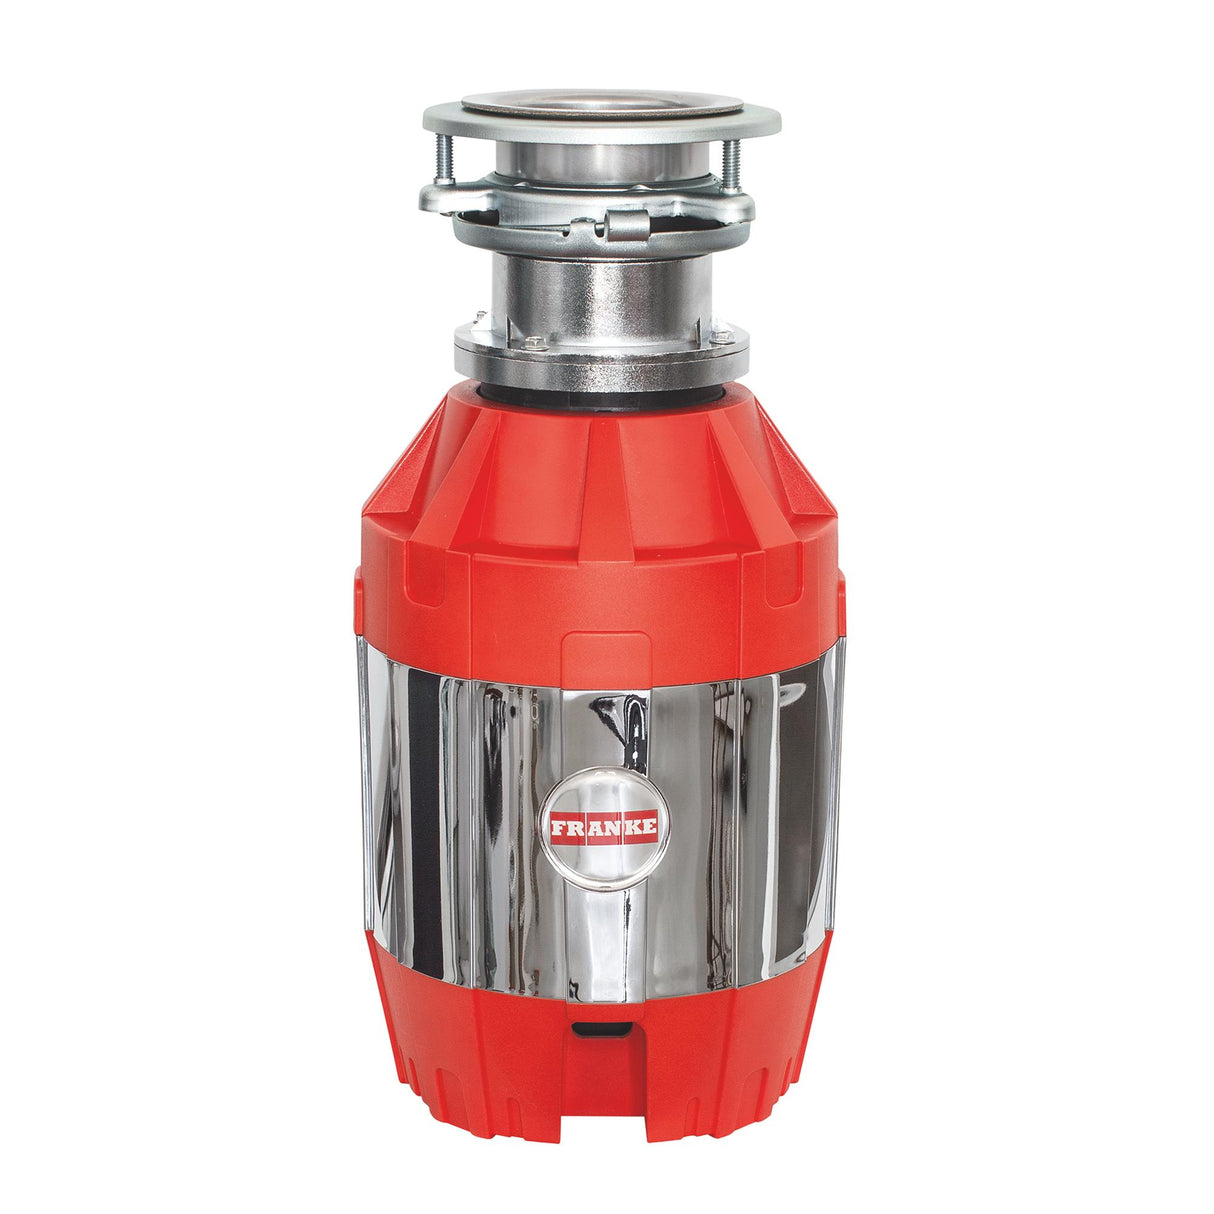 FRANKE FWDJ75B 3/4 Horse Power Quiet Batch Feed Waste Disposer Torque Master 2700 RPM Jam-Resistant DC Motor in Red/Chrome